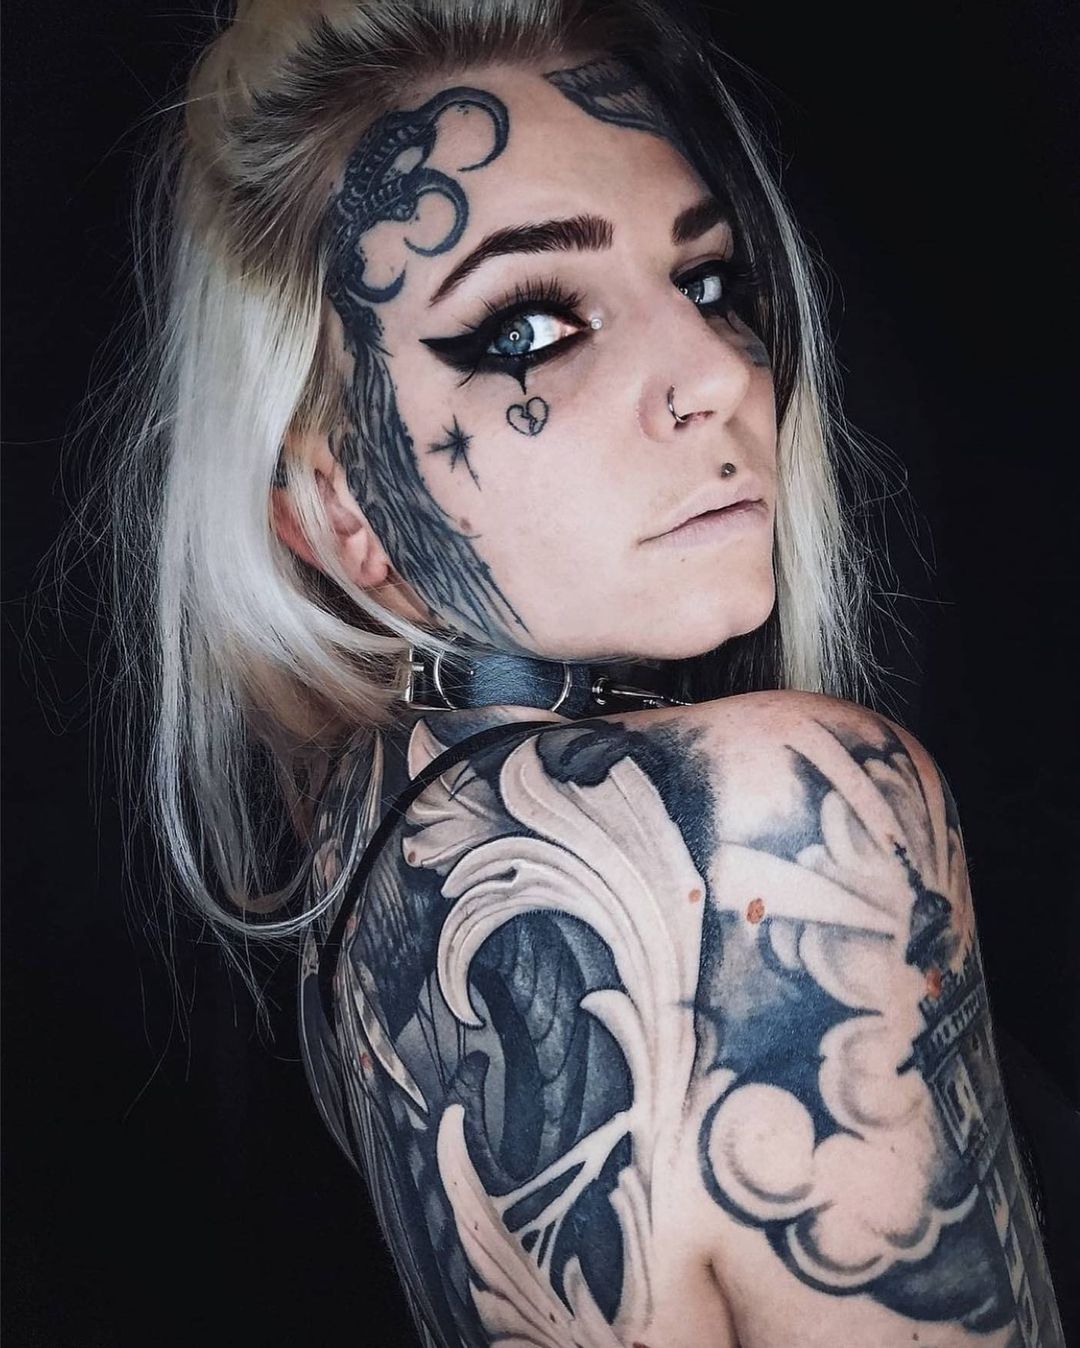 20 of the most eye-catching face tattoos!